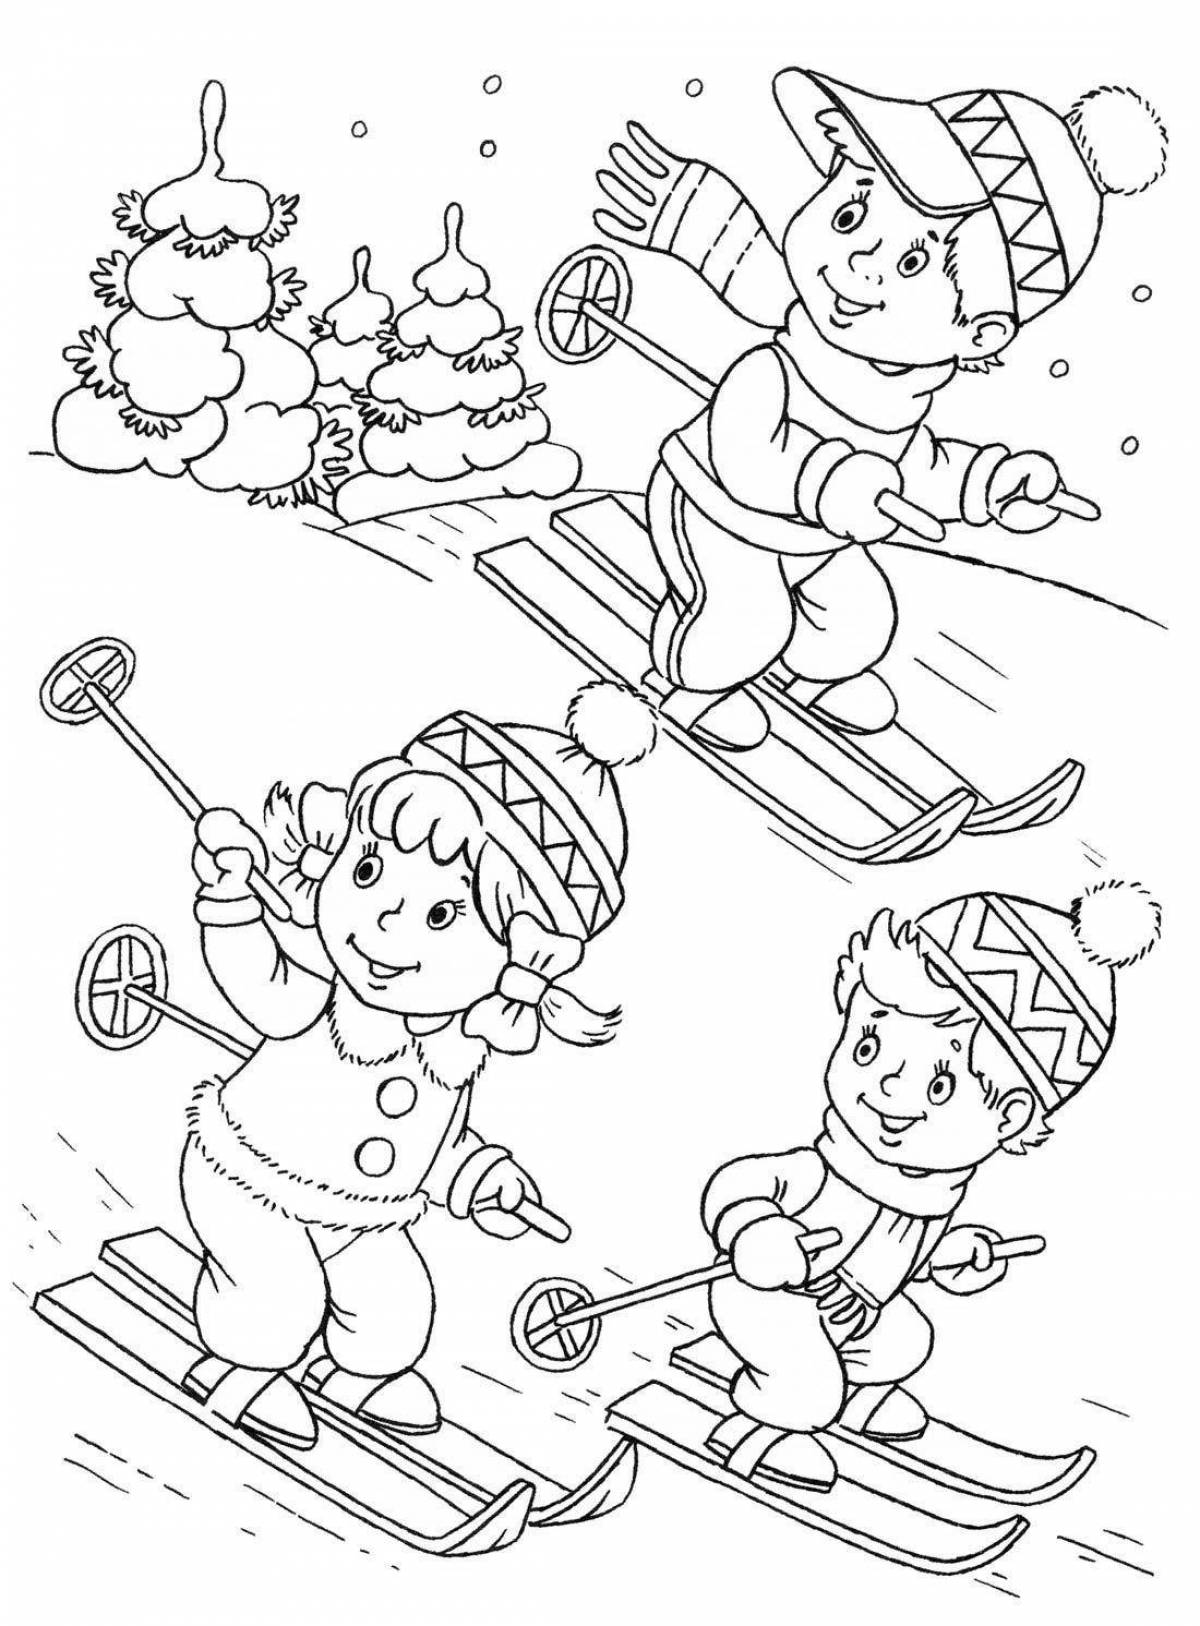 Delightful winter coloring book for children 6-7 years old